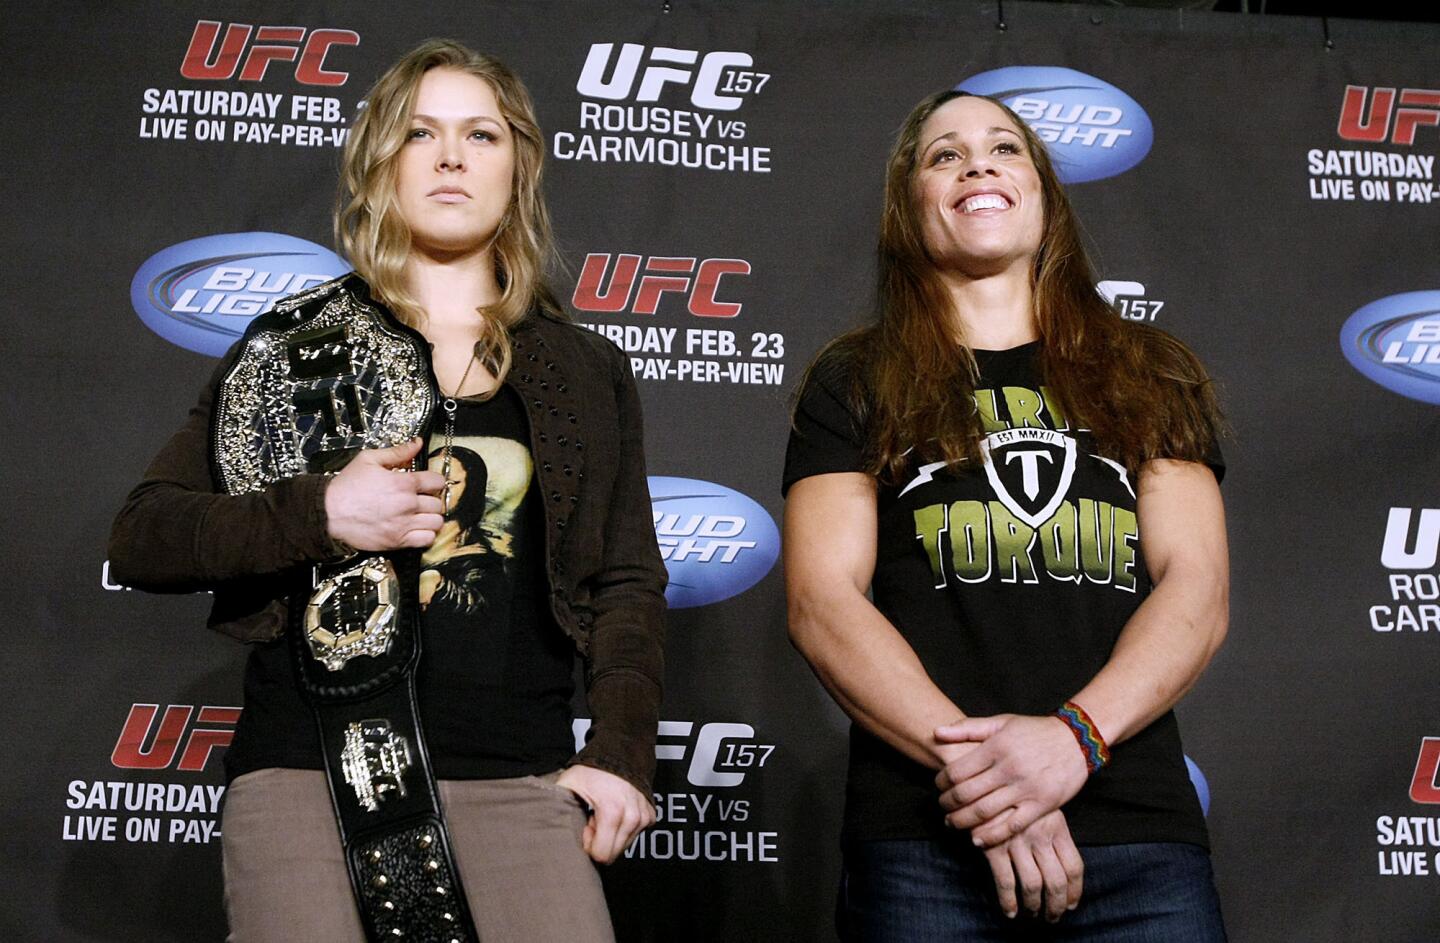 UFC's first-ever Women's Bantamweight Champion Ronda Rousey, left, strikes a pose next to contender Liz Carmouche, right, during press conference at the Honda Center in Anaheim on Thursday, February 21, 2013. Rousey, who trains at the Glendale Fighting Club in Glendale, will defend her title against former Marine Carmouche on Saturday, February 23, 2013.